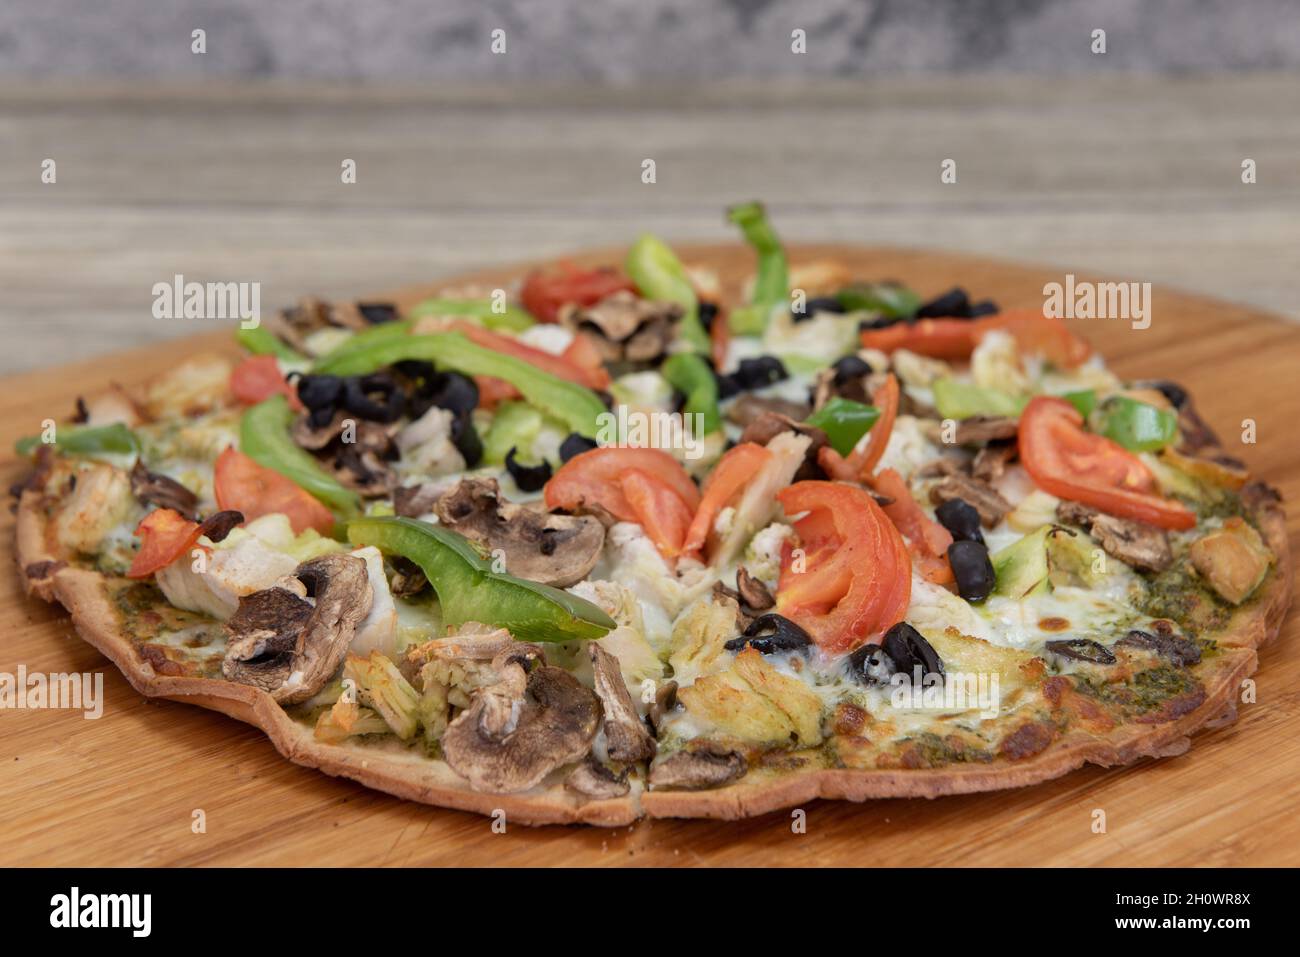 Freshly baked cauliflower crust pizza with chopped vegetable toppings served on a wooden platter. Stock Photo